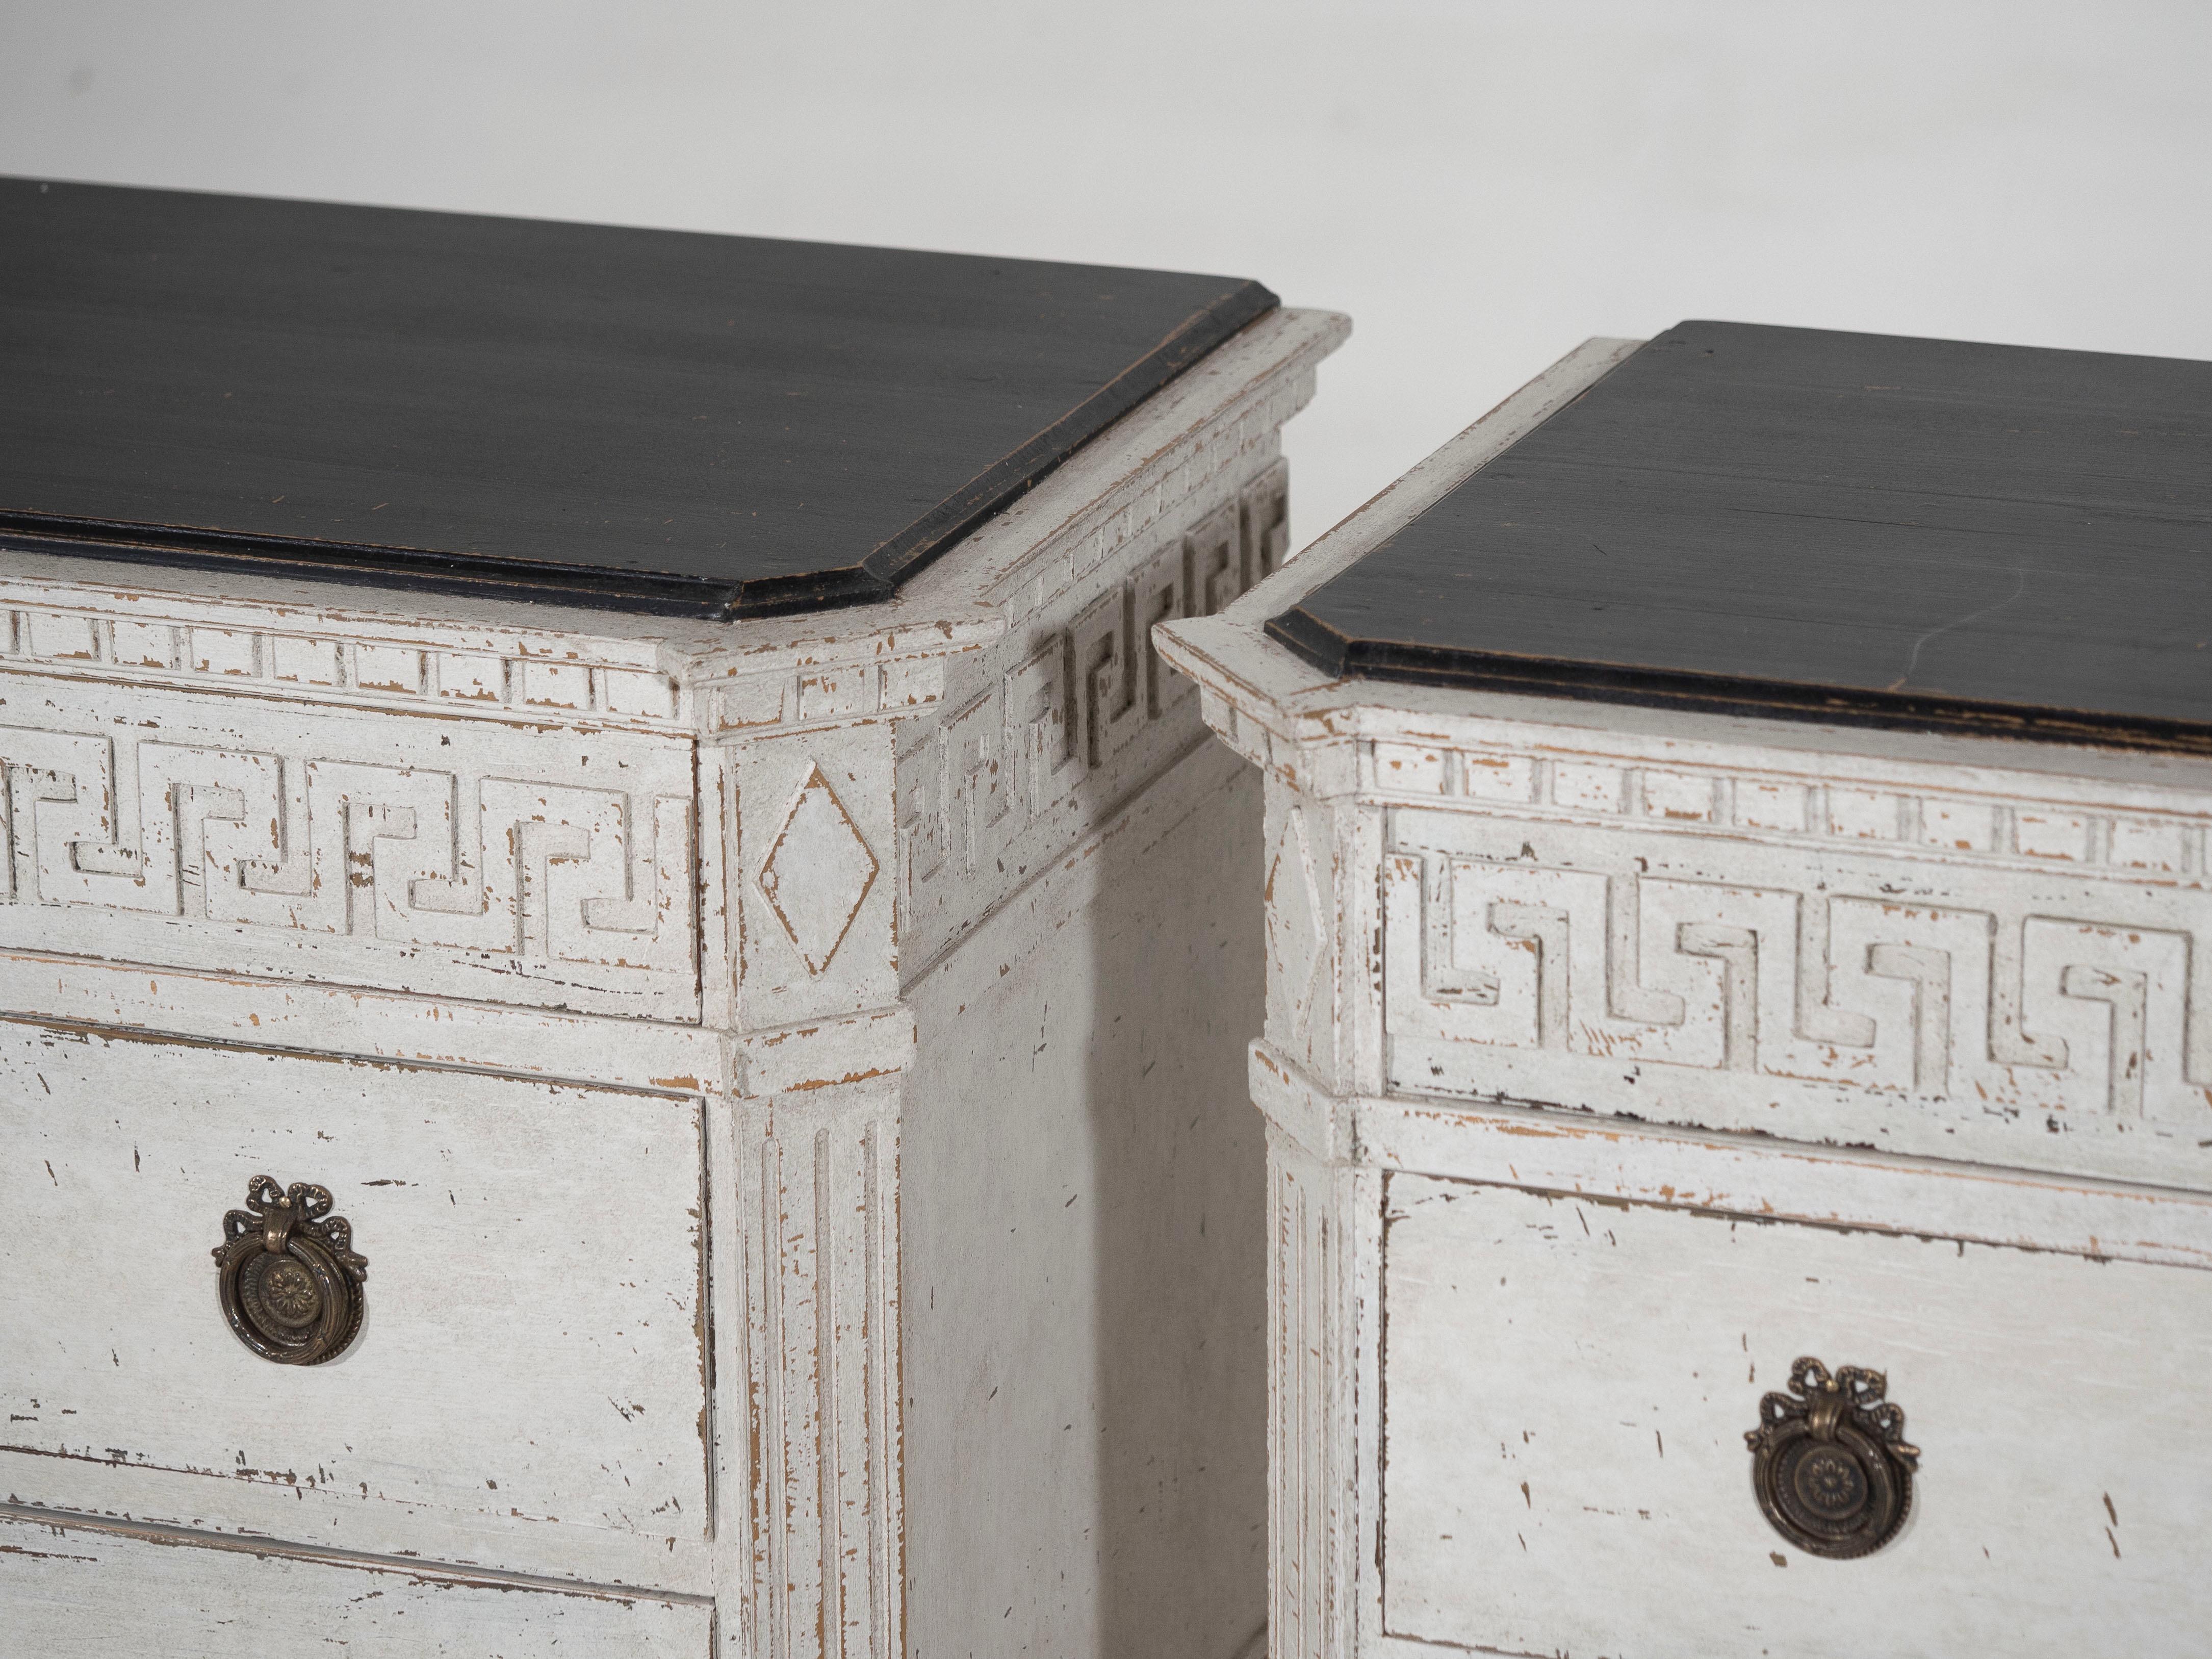 Marvelous pair of Gustavian style chests with beautiful carving, from around 100 years ago.